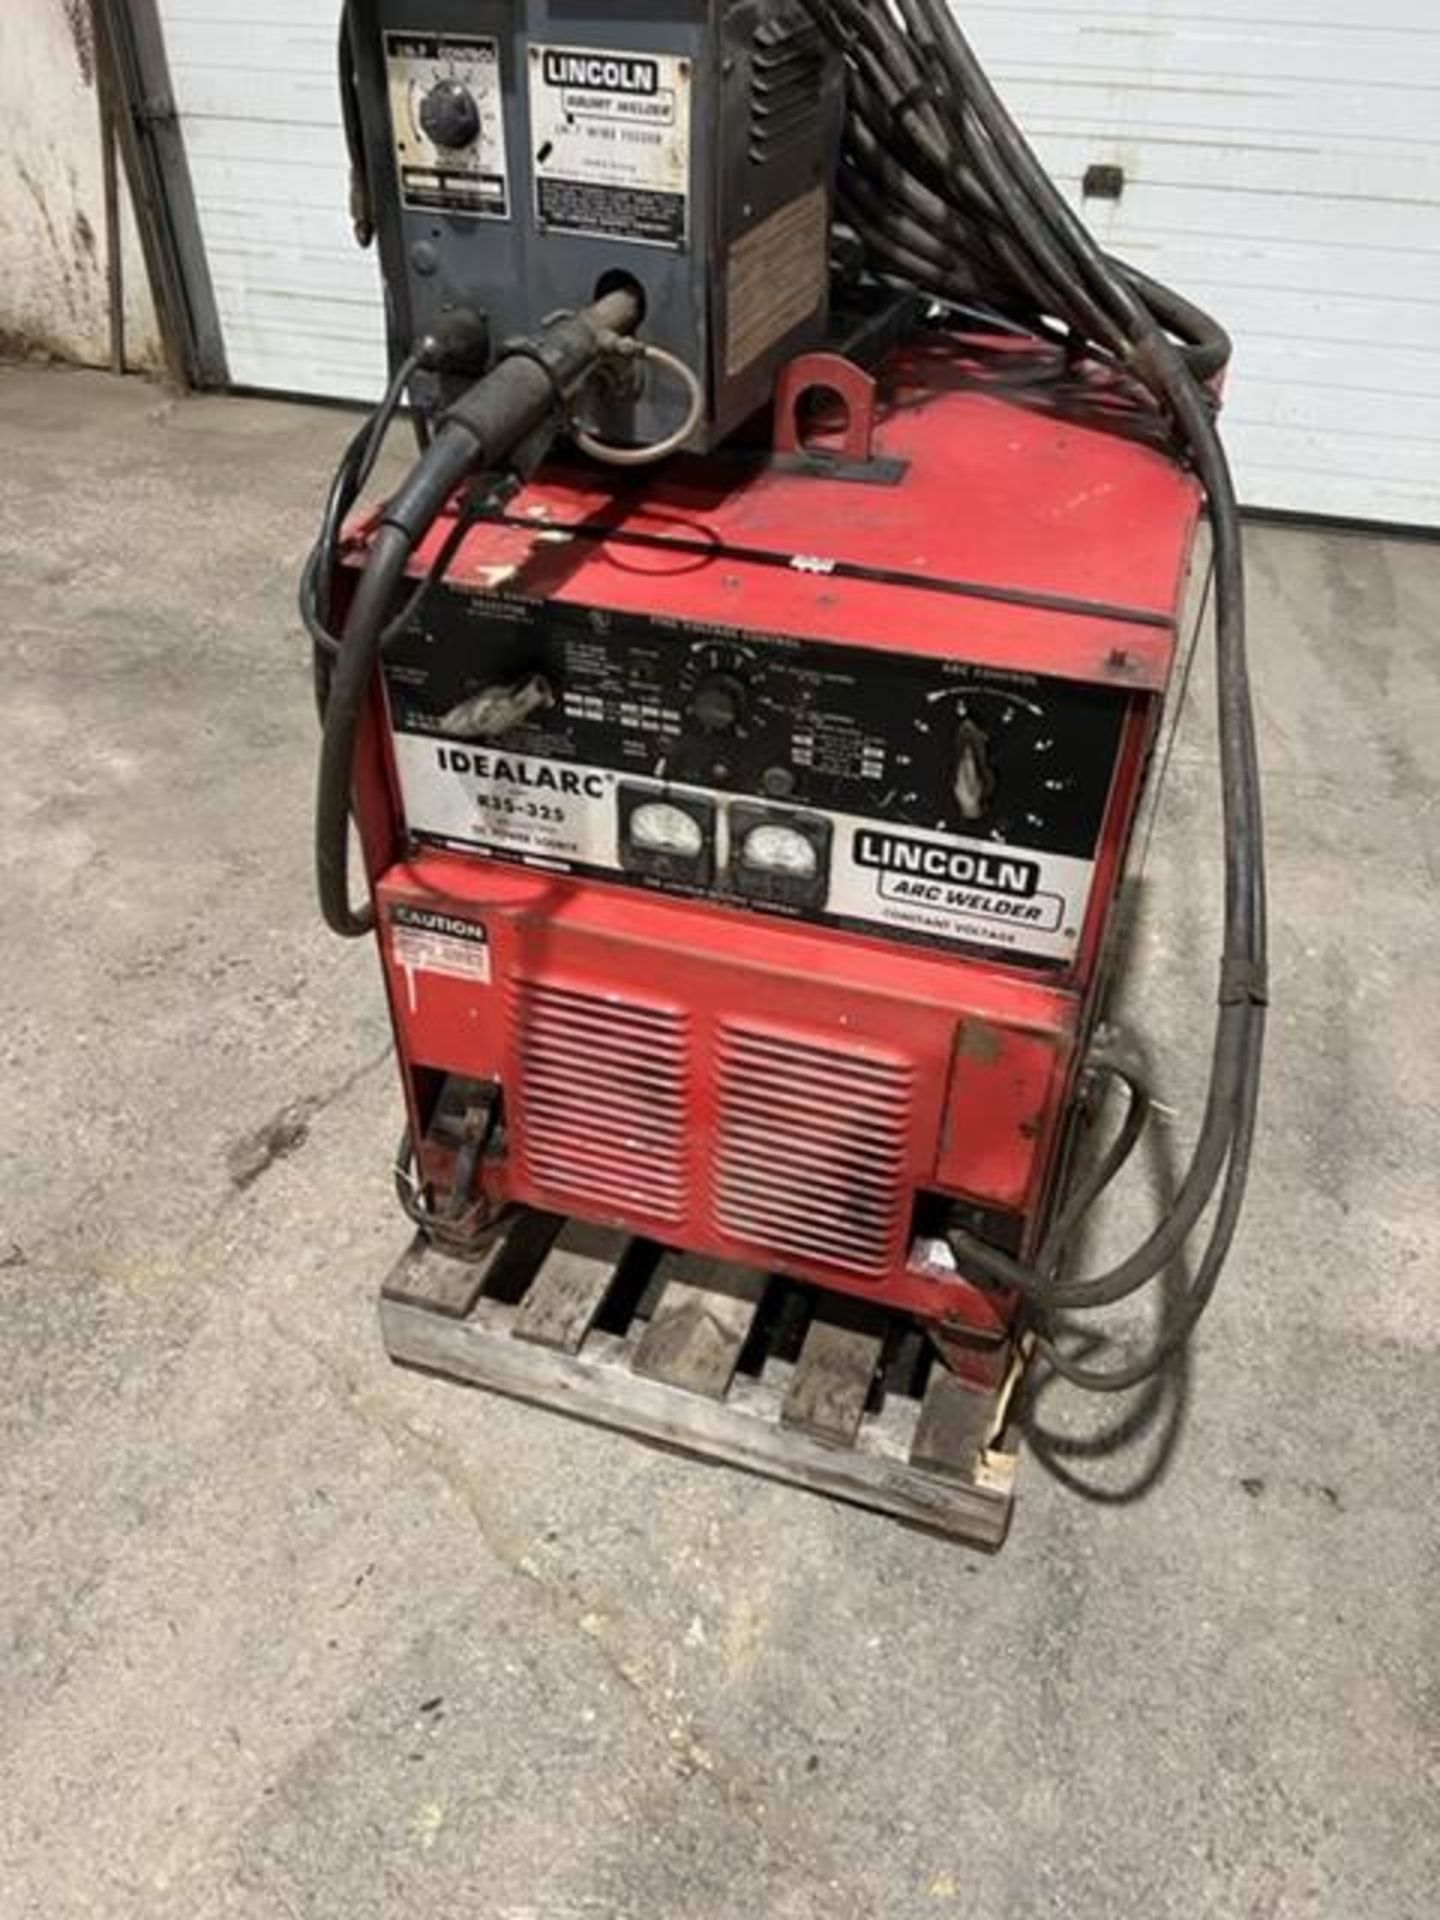 Lincoln R35 - 325 Mig Welder with LN-7 Wire Feeder Complete with Gun & Cables